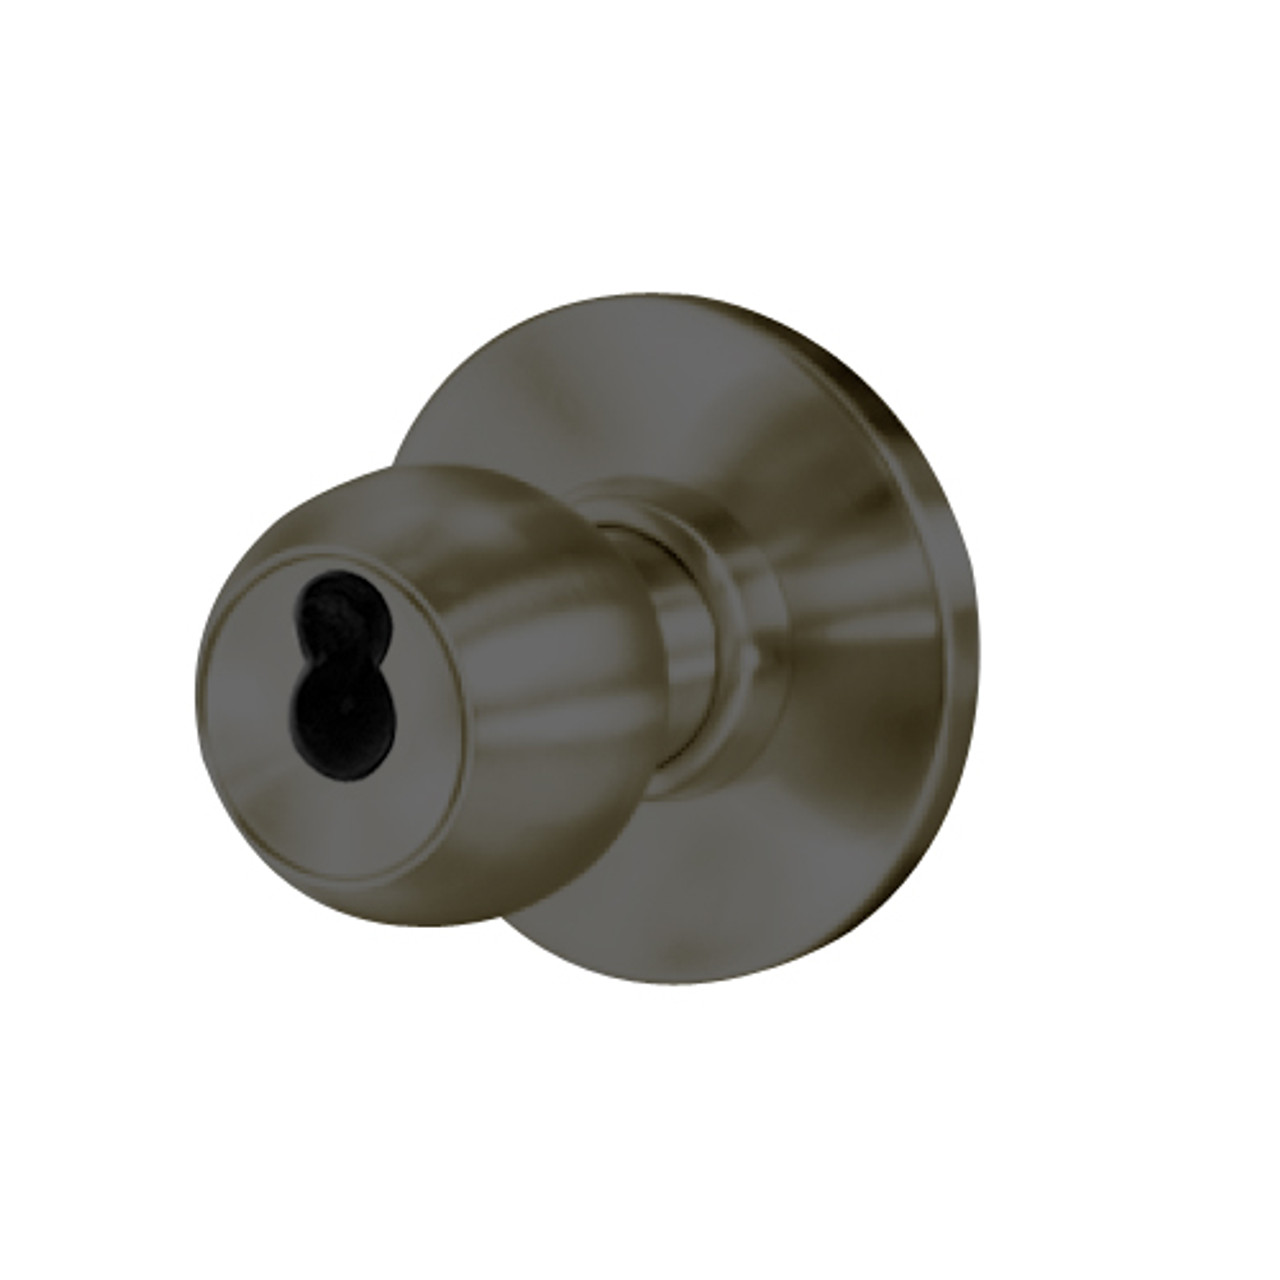 8K47S4AS3613 Best 8K Series Communicating Heavy Duty Cylindrical Knob Locks with Round Style in Oil Rubbed Bronze